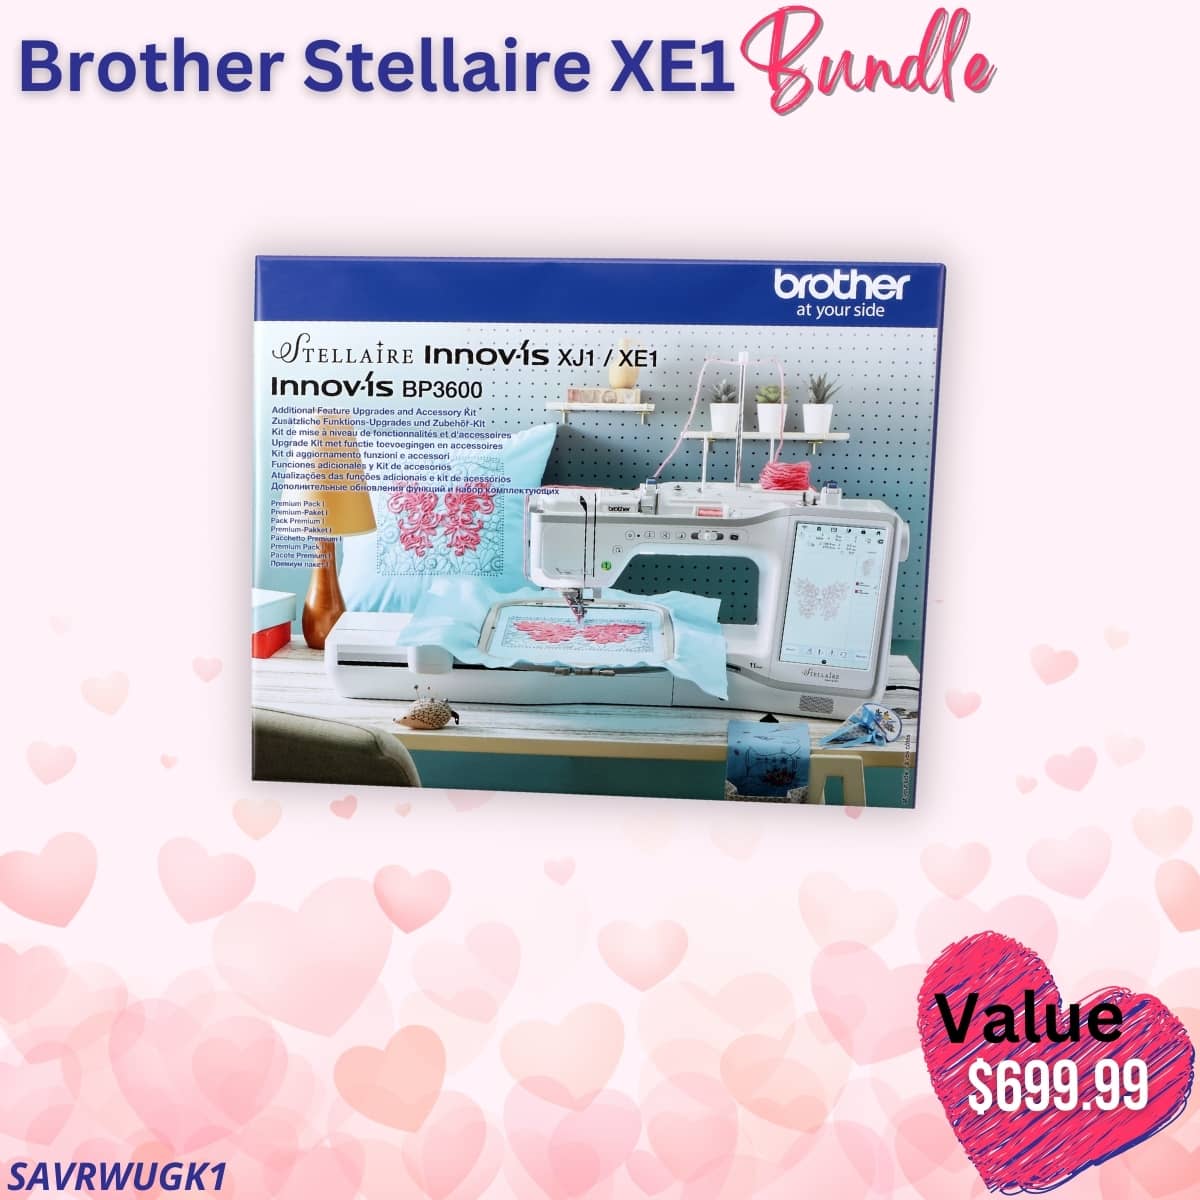 Brother Stellaire XE1 bundle for Valentine's Sale